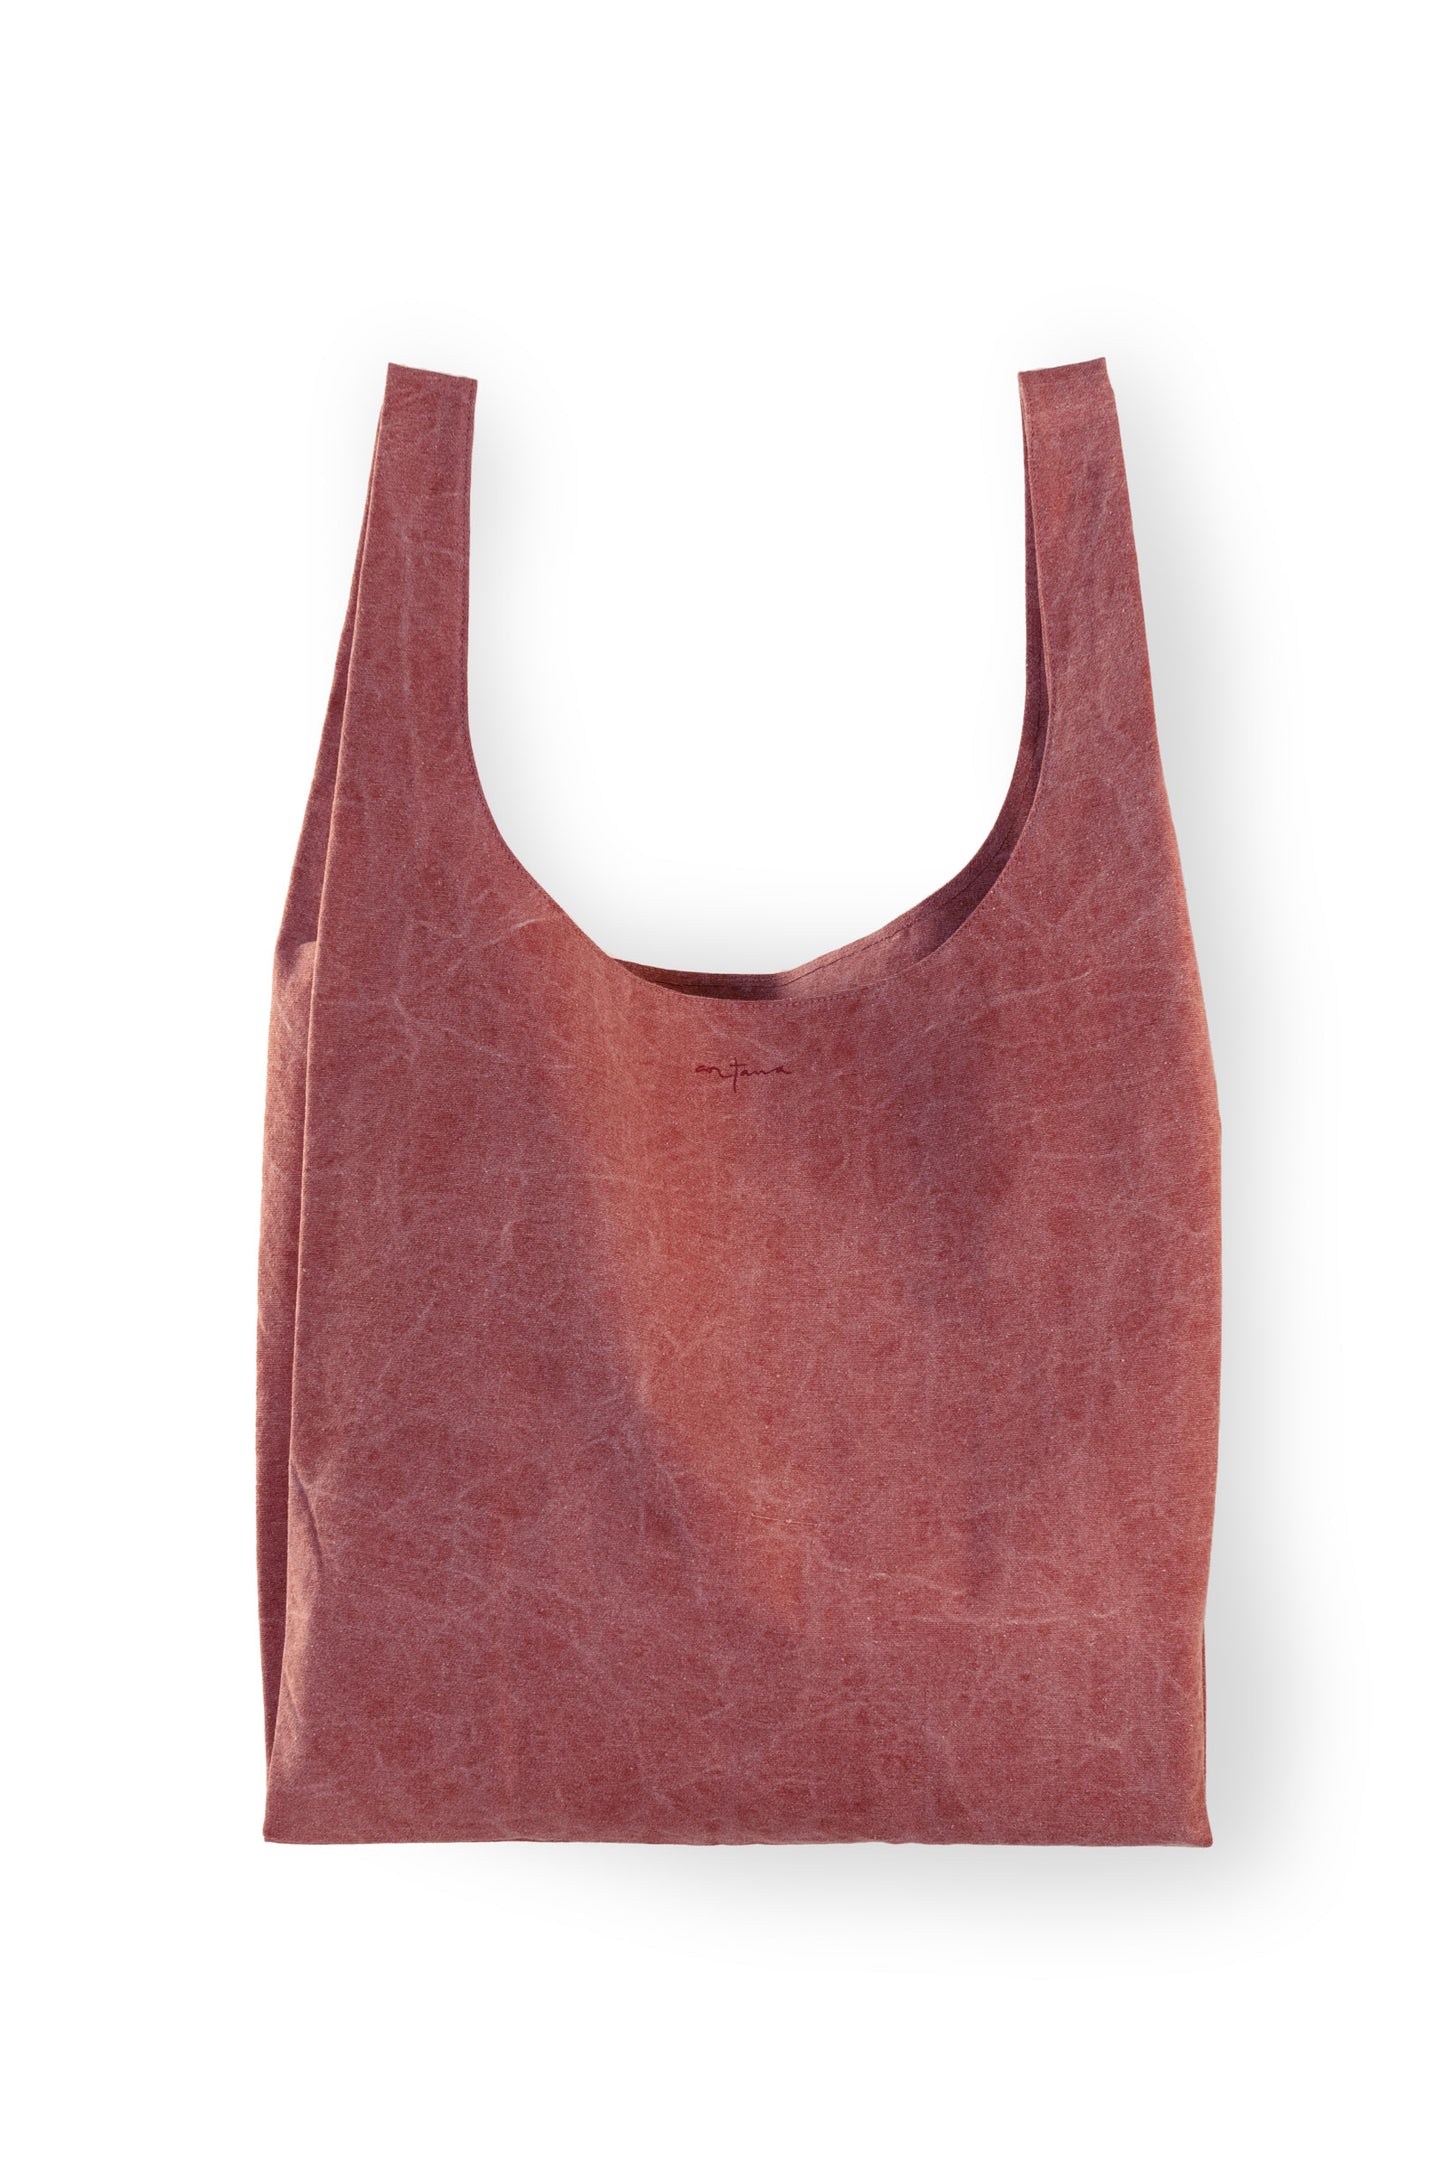 U XL bag in red washed cotton